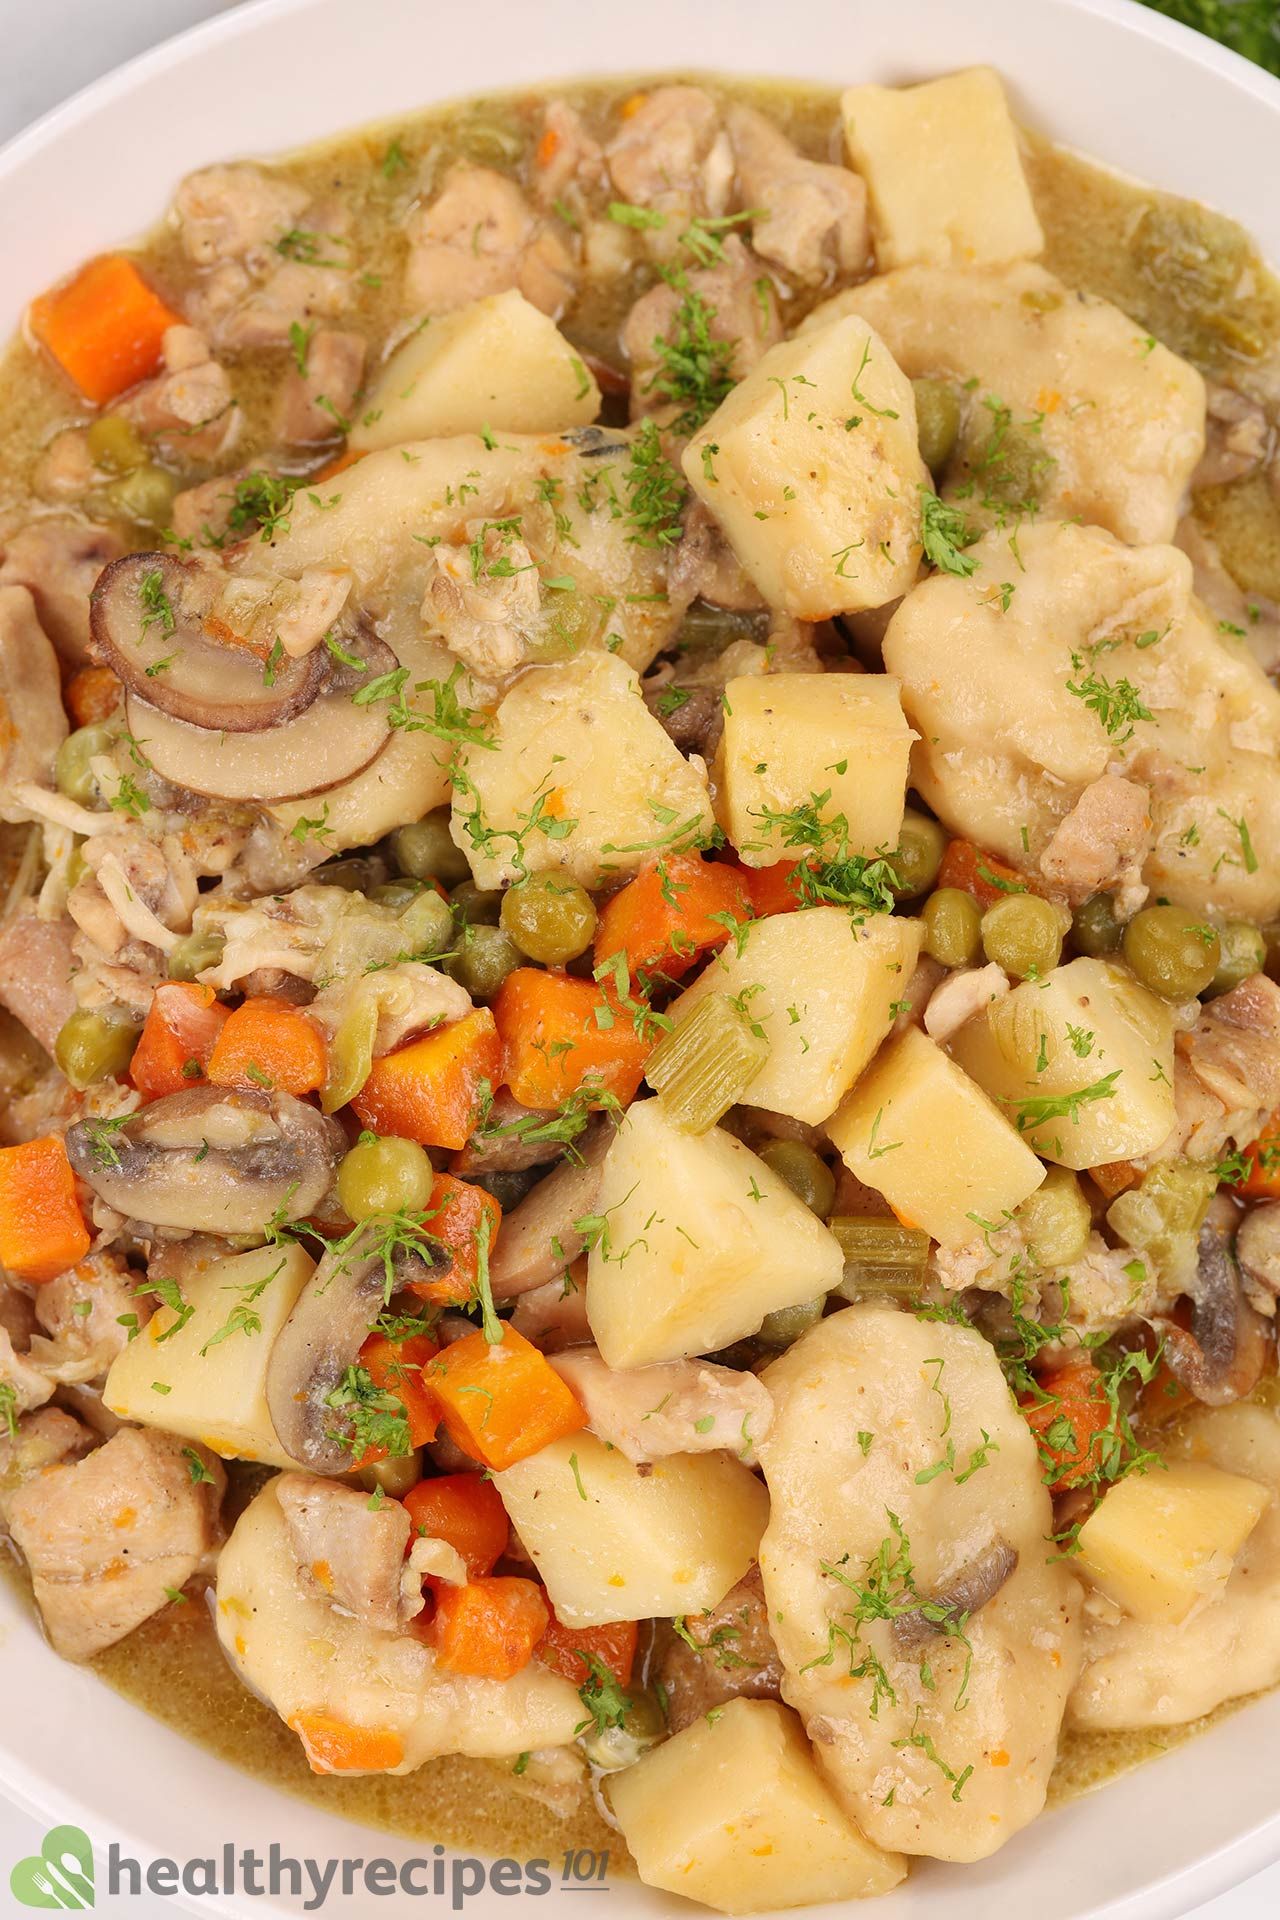 Is This Chicken and Dumplings Recipe Healthy